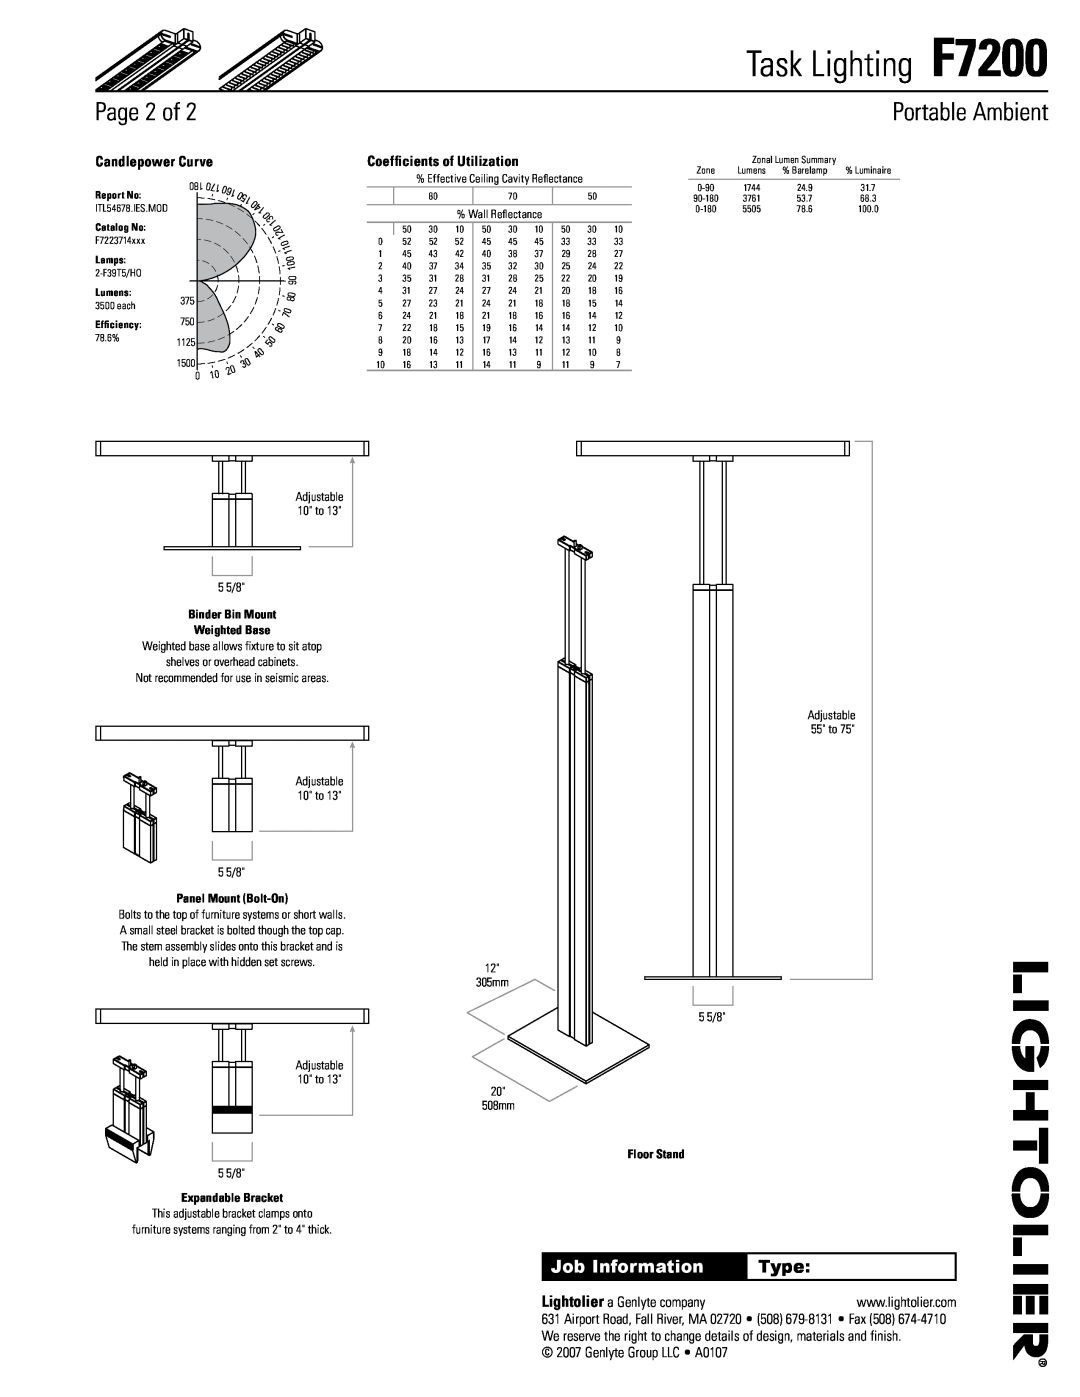 Lightolier Page, Task Lighting F7200, Portable Ambient, Job Information, Type, Candlepower Curve, Panel Mount Bolt-On 